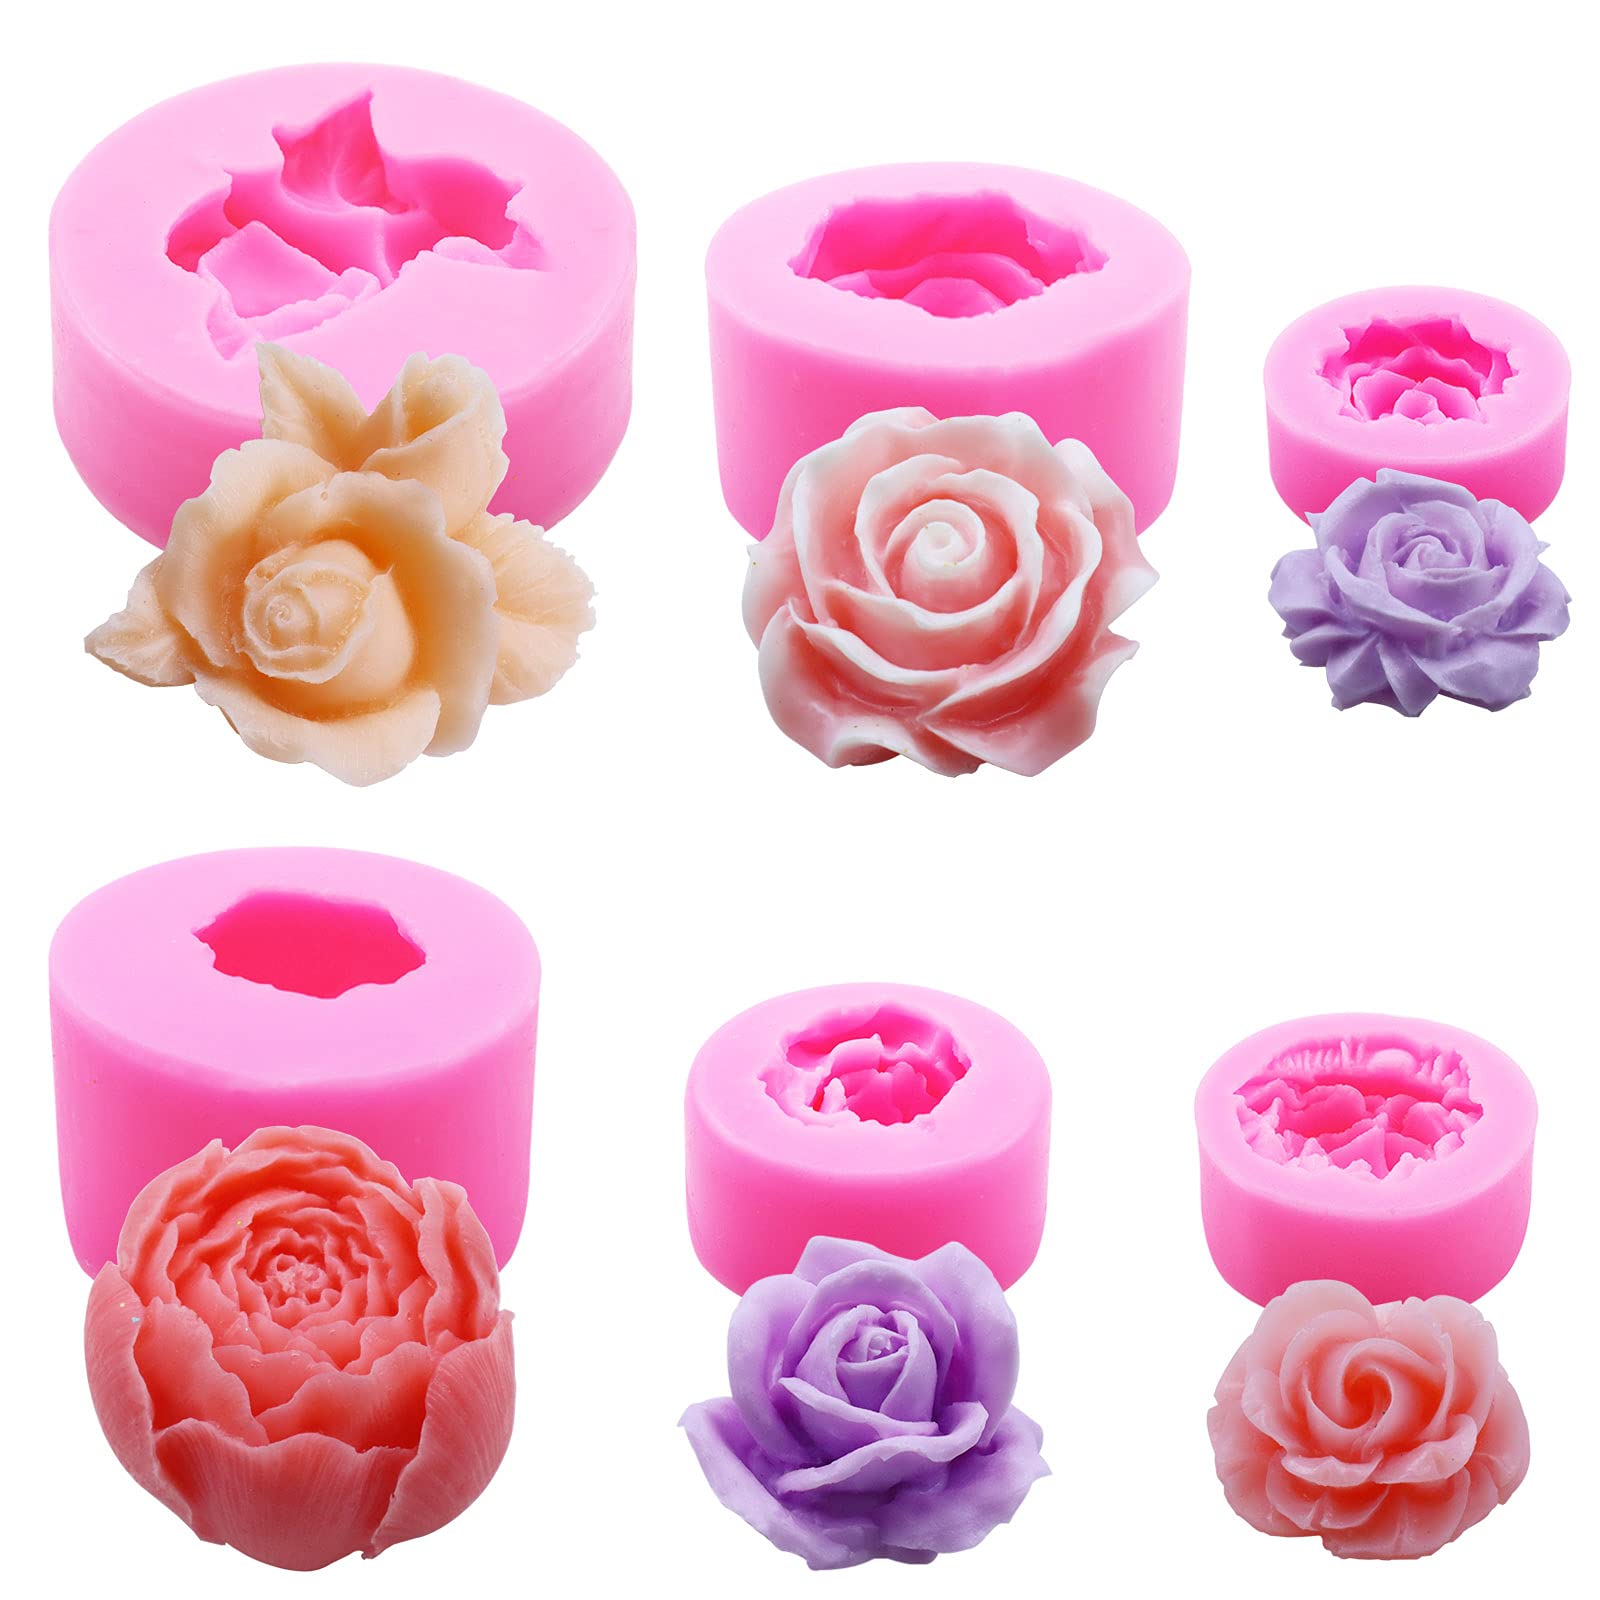 6Pcs 3D Flower Silicone Molds Set, Bloom Rose Silicone Molds for